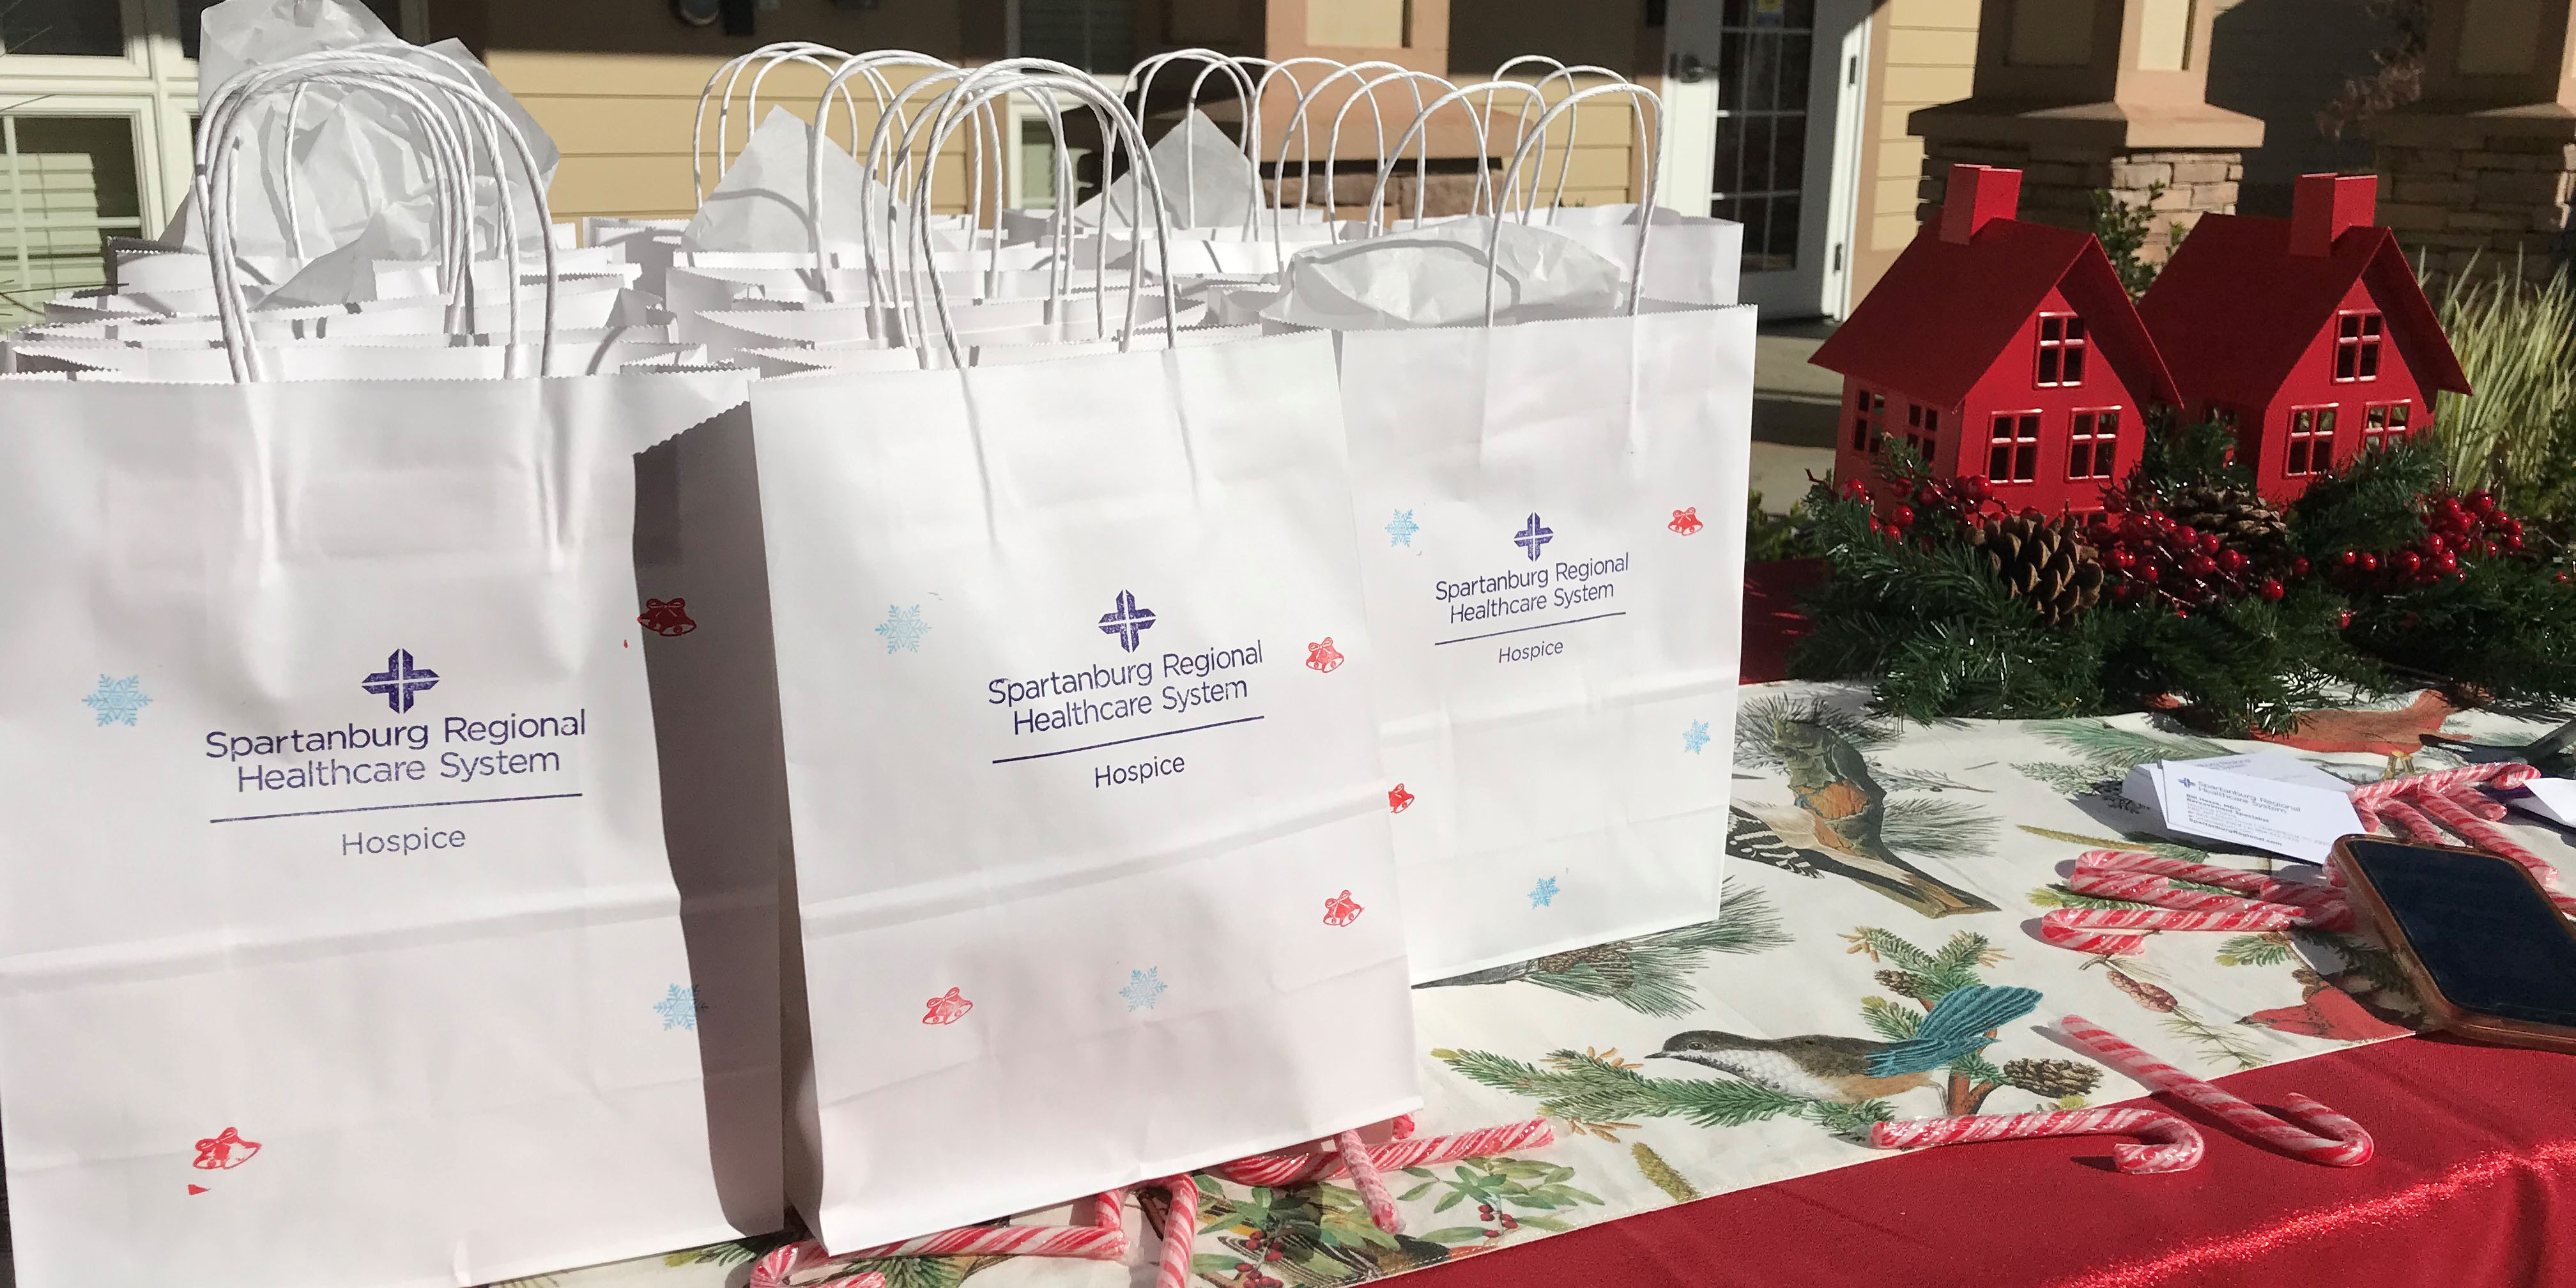 &ldquo;Porch pick-up&rdquo; supports grieving families during holidays 